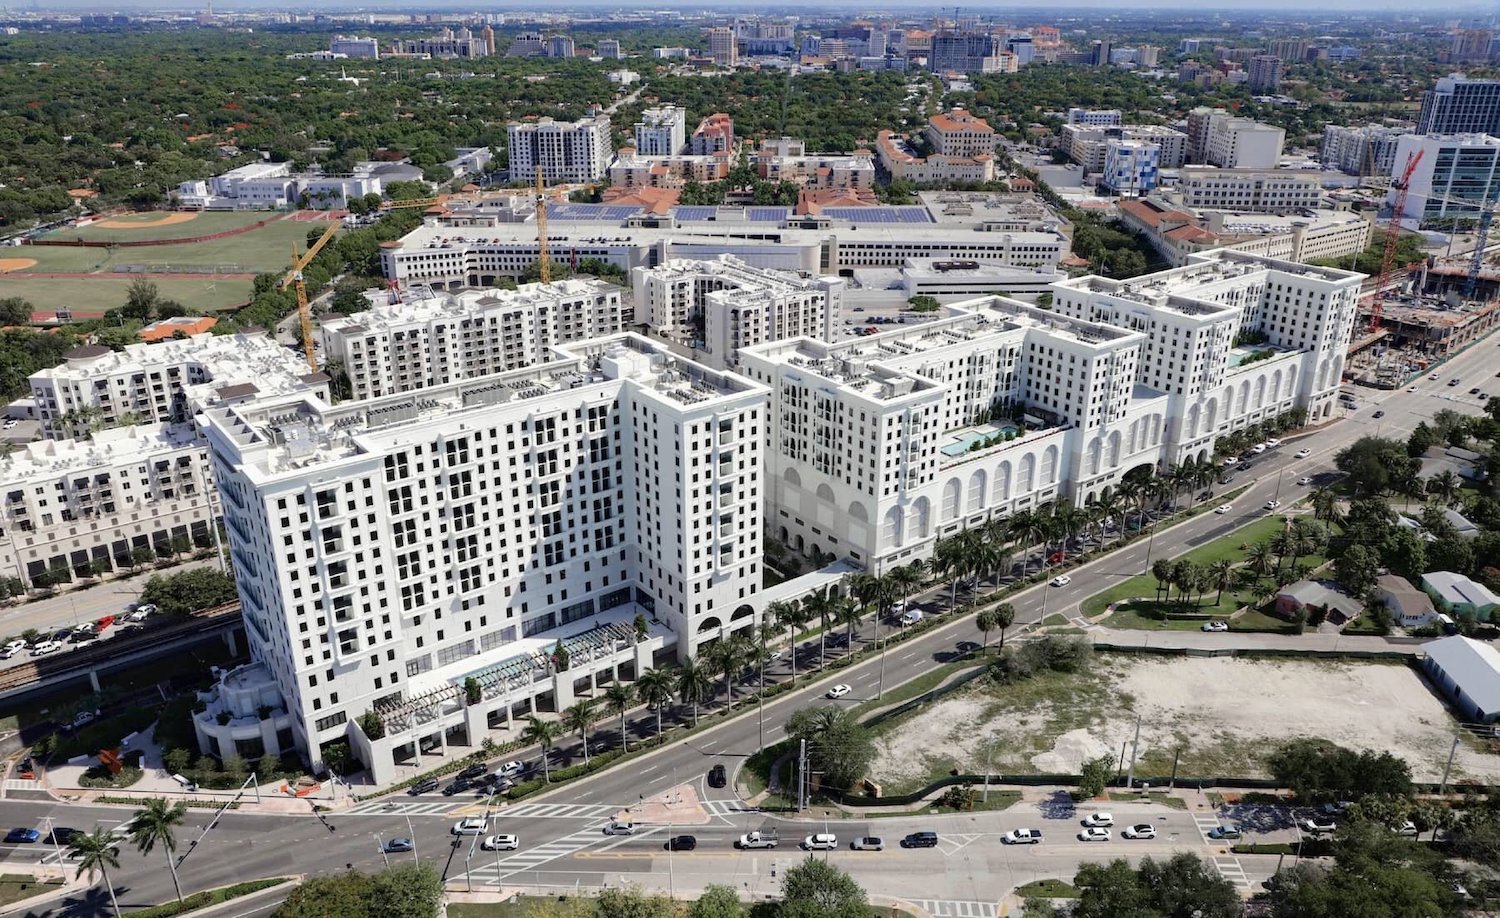 Hines Global Income Trust Buys Luxury Multifamily Property in Miami for $430 Million